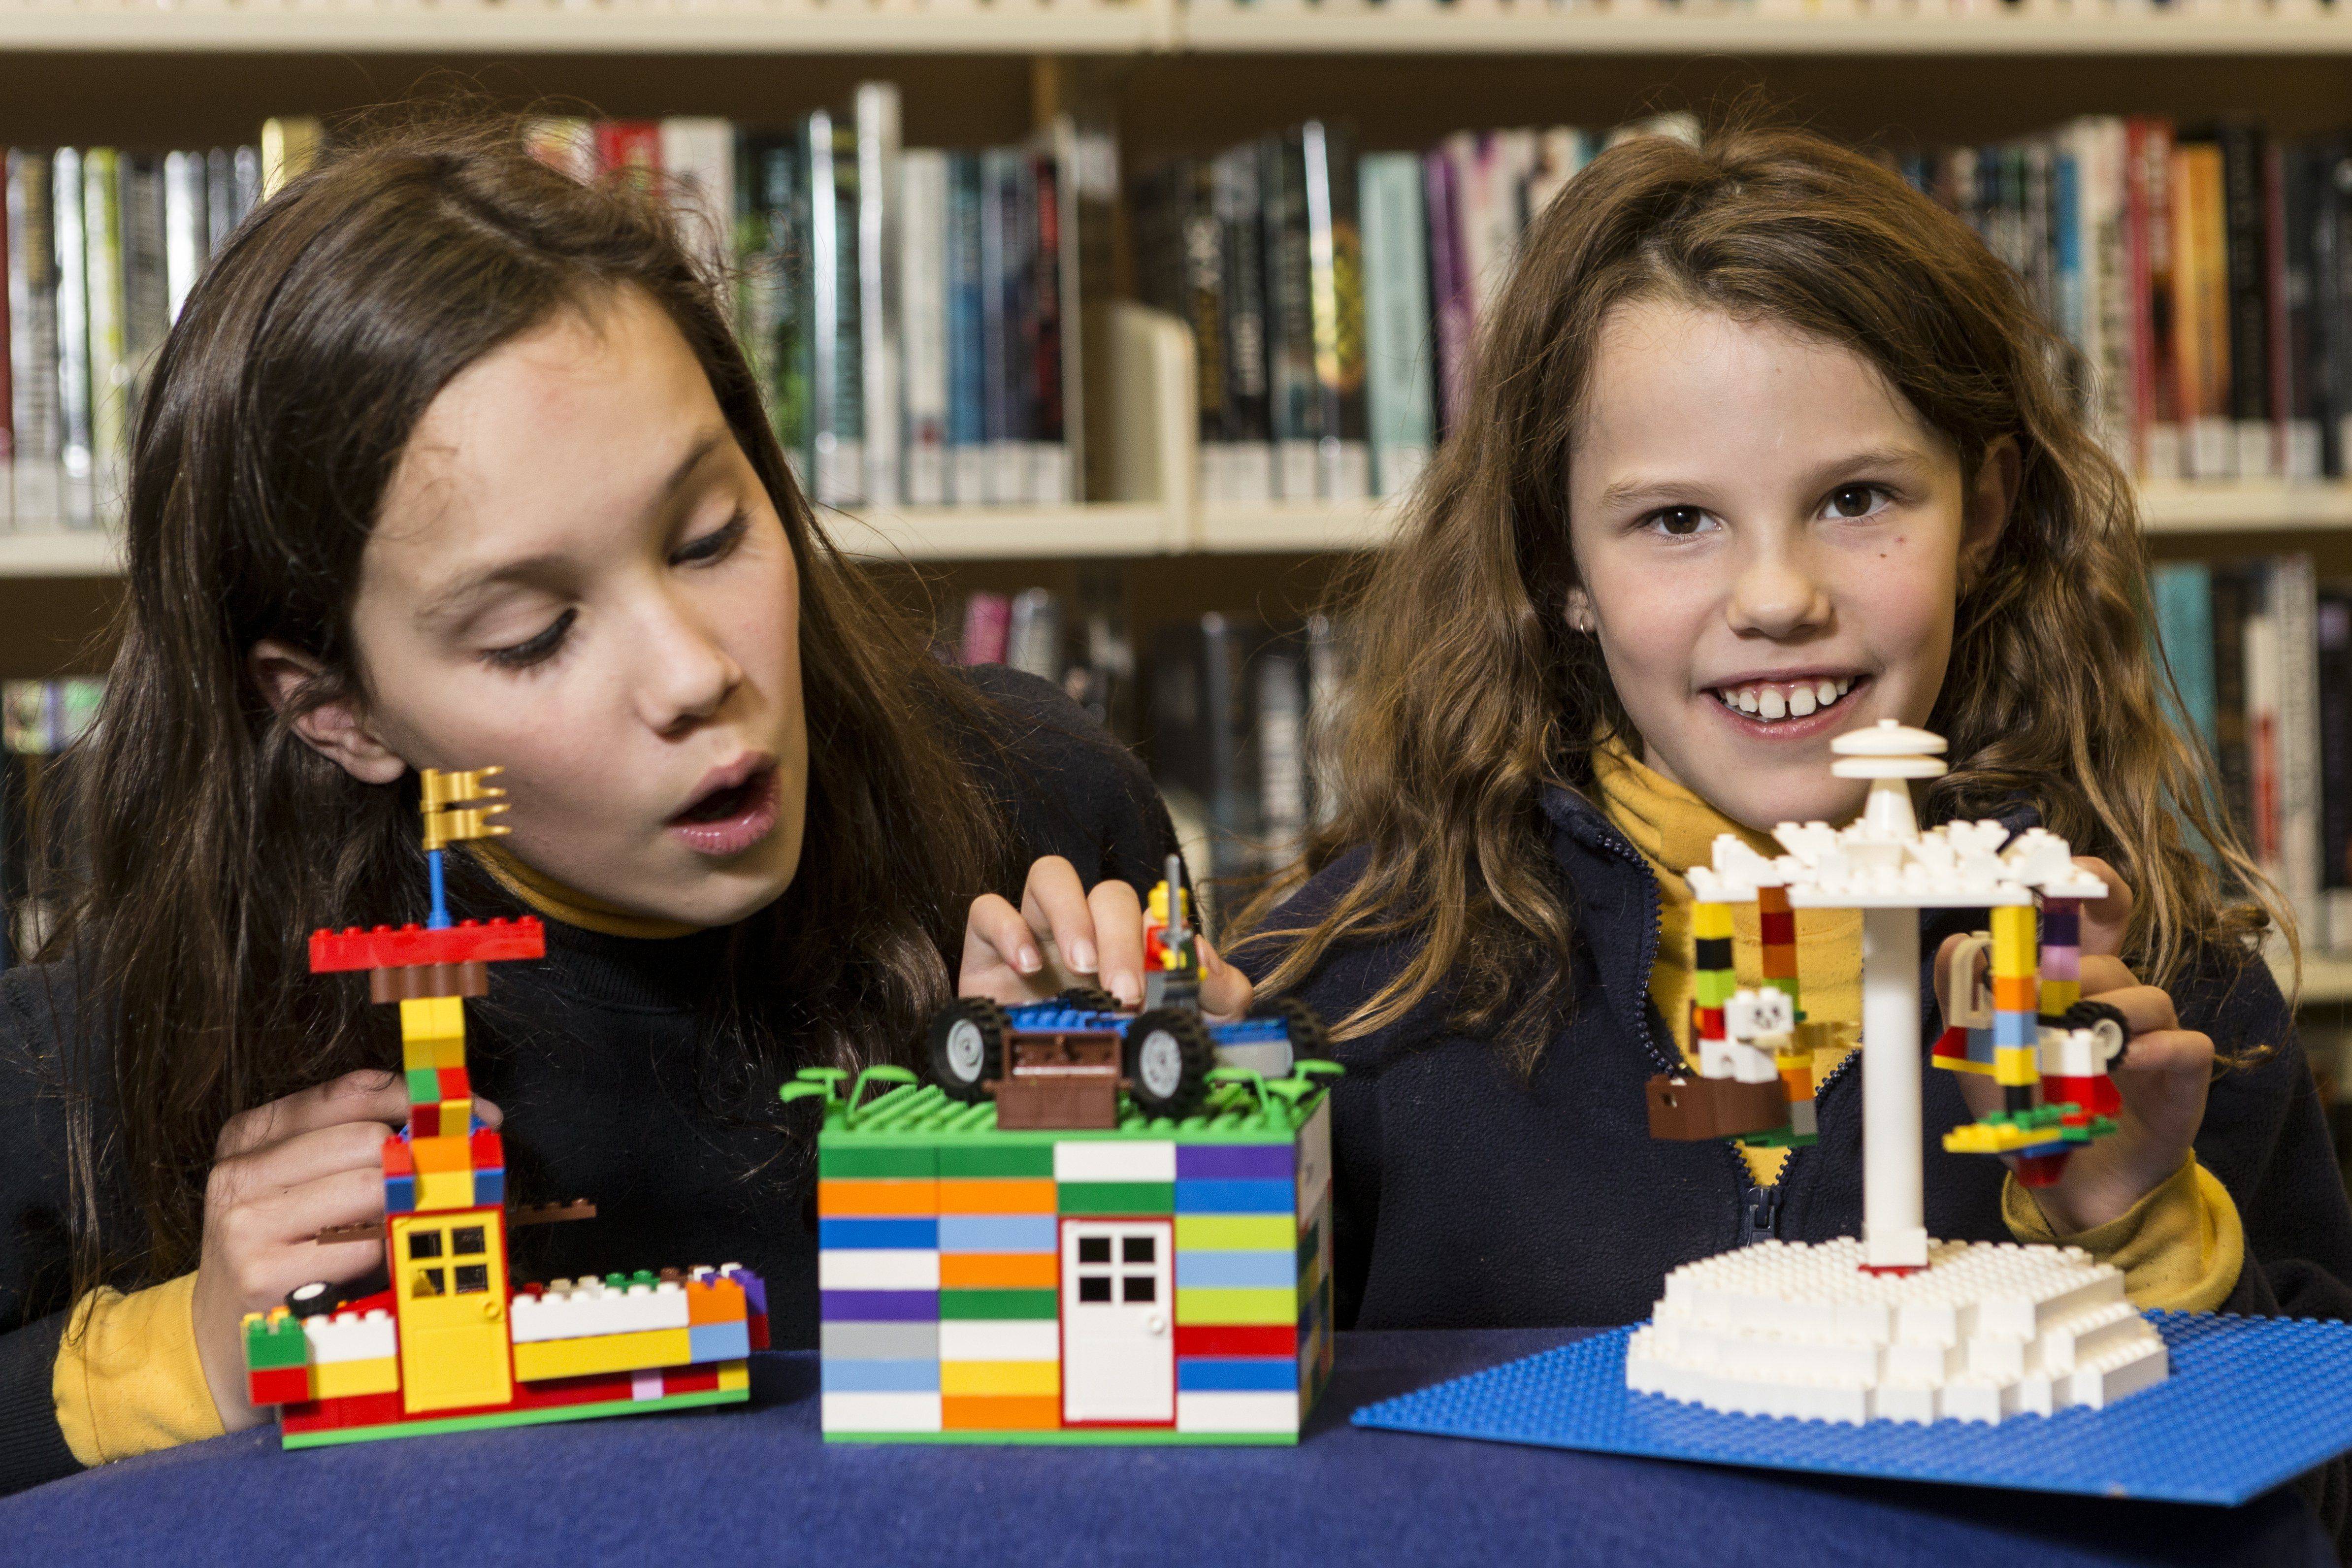 Cooma Library Lego Club - the building blocks of creativity